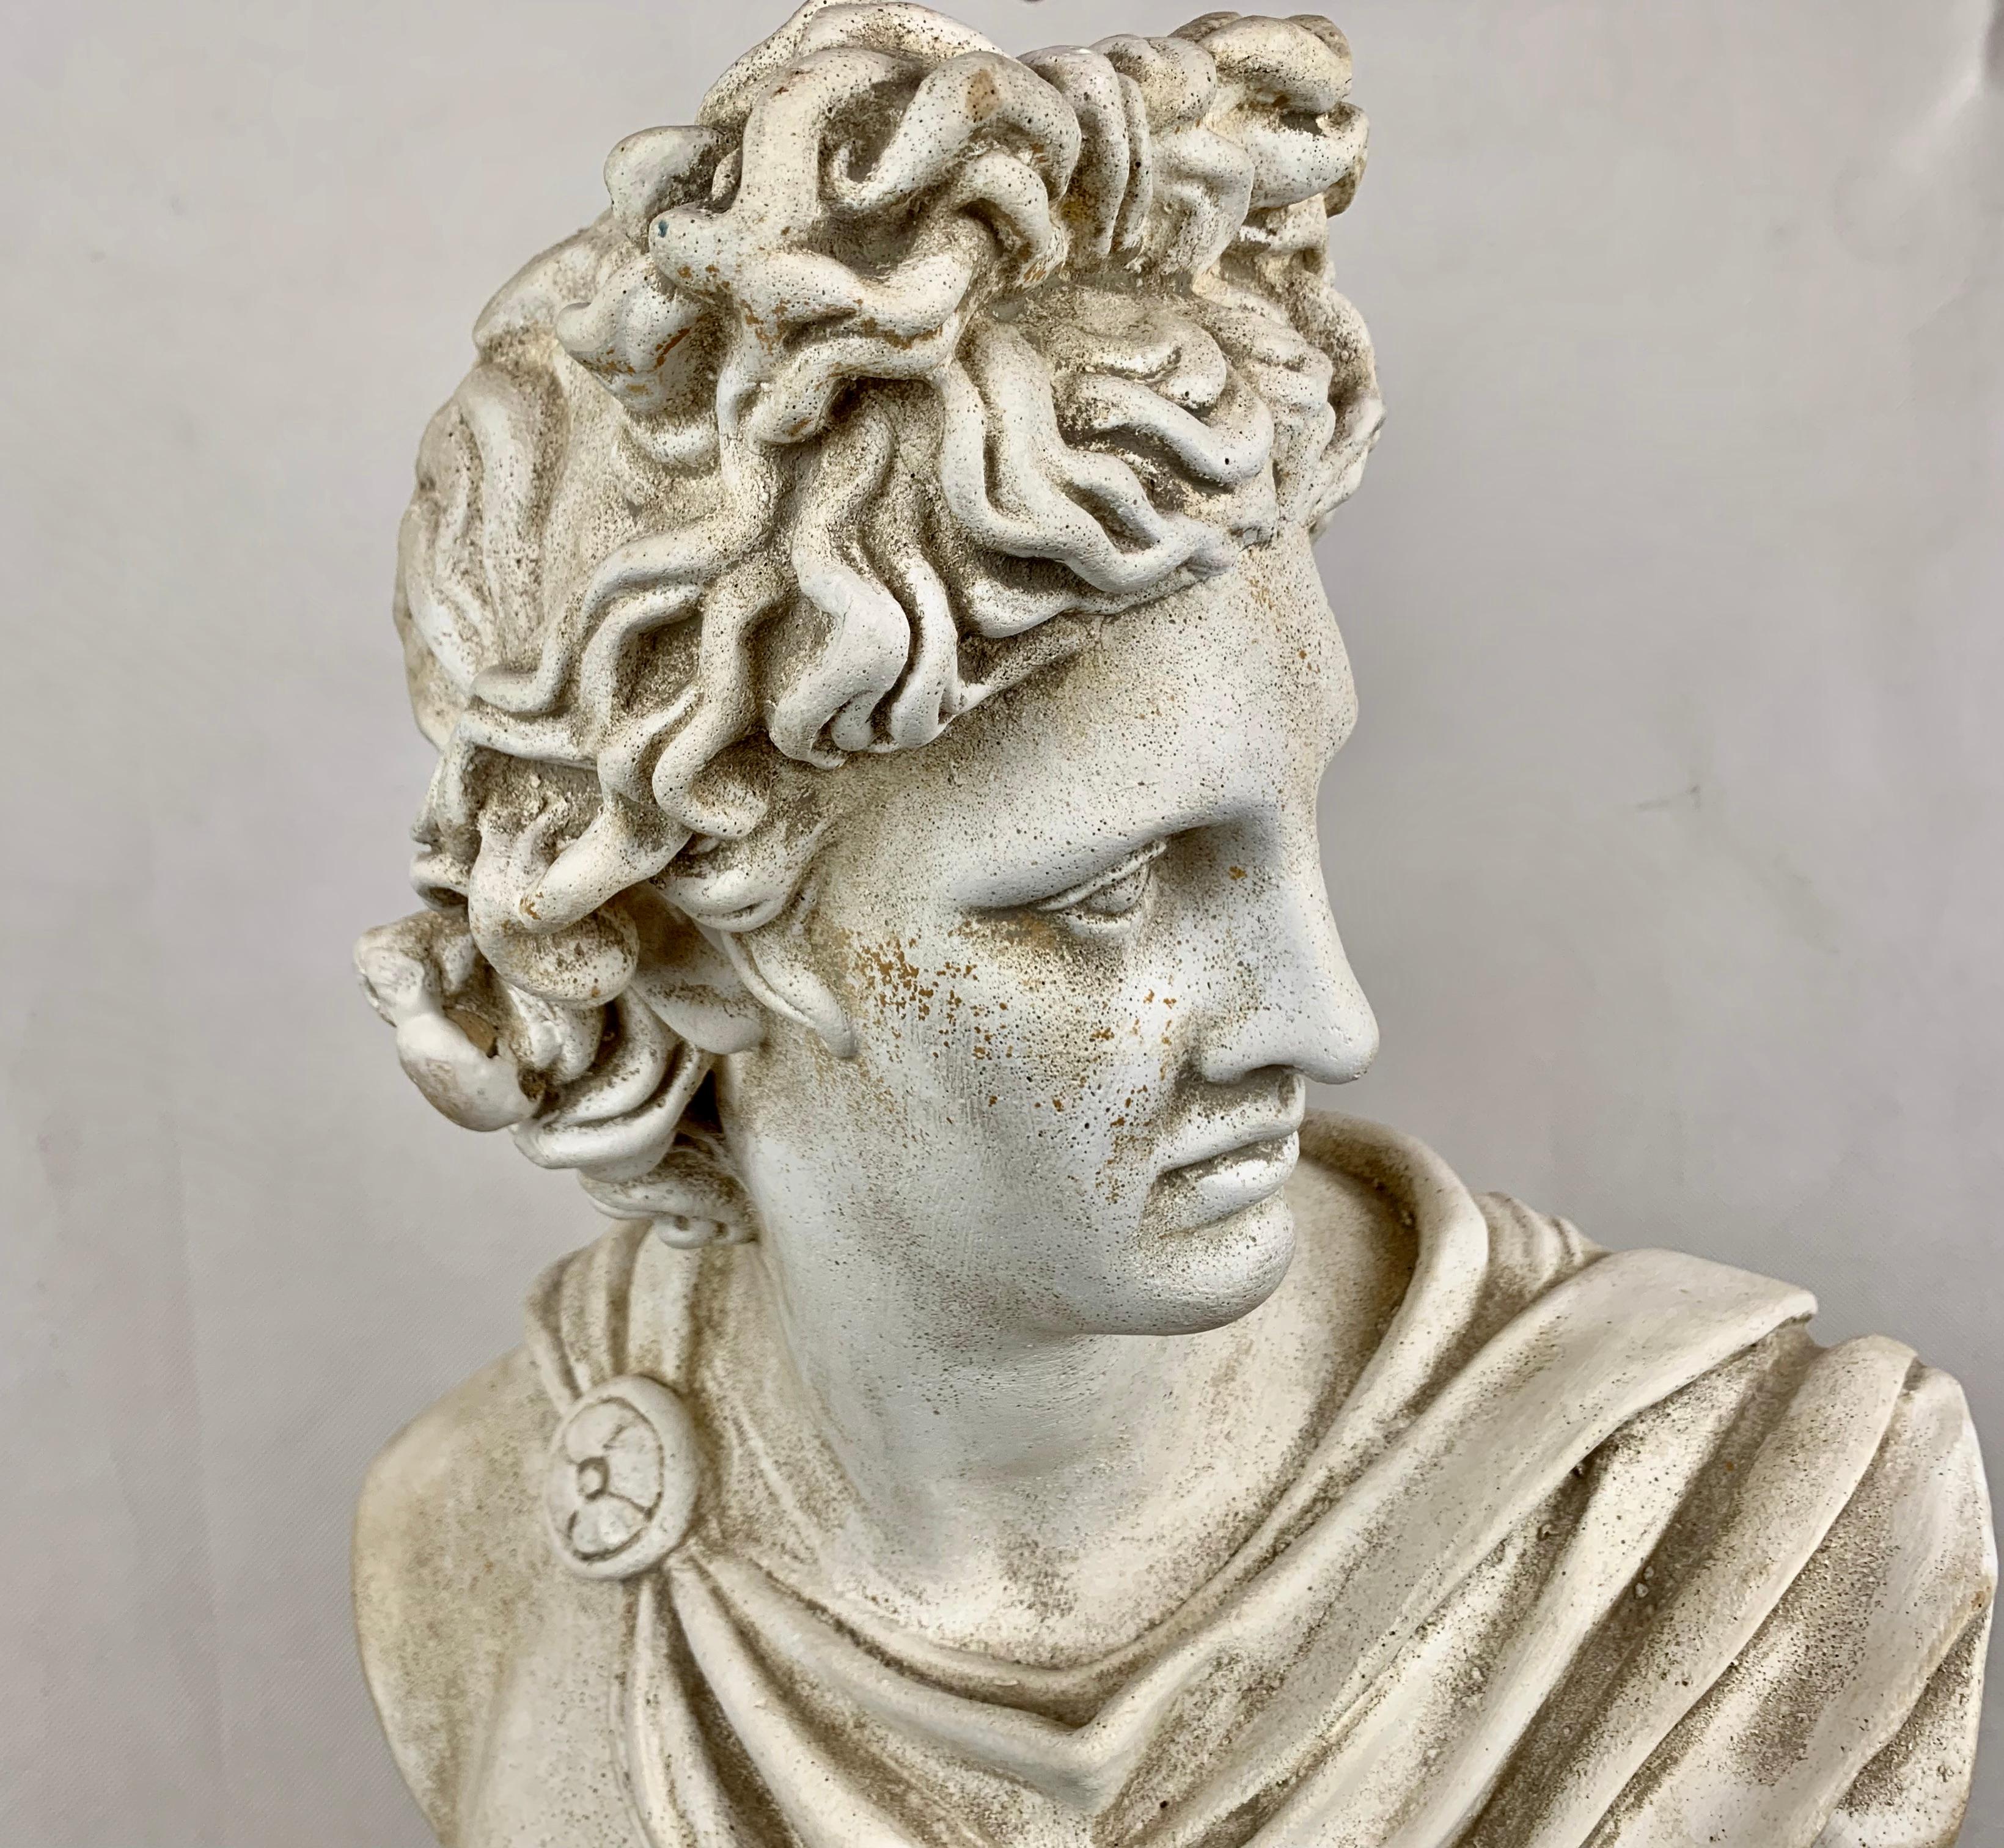 The Apollo Belvedere in plaster. This copy of the famous bust is after the Roman original which has resided in the Vatican since the early party of the sixteenth century. It is considered one of the greatest ancient sculptures of the neoclassic age.